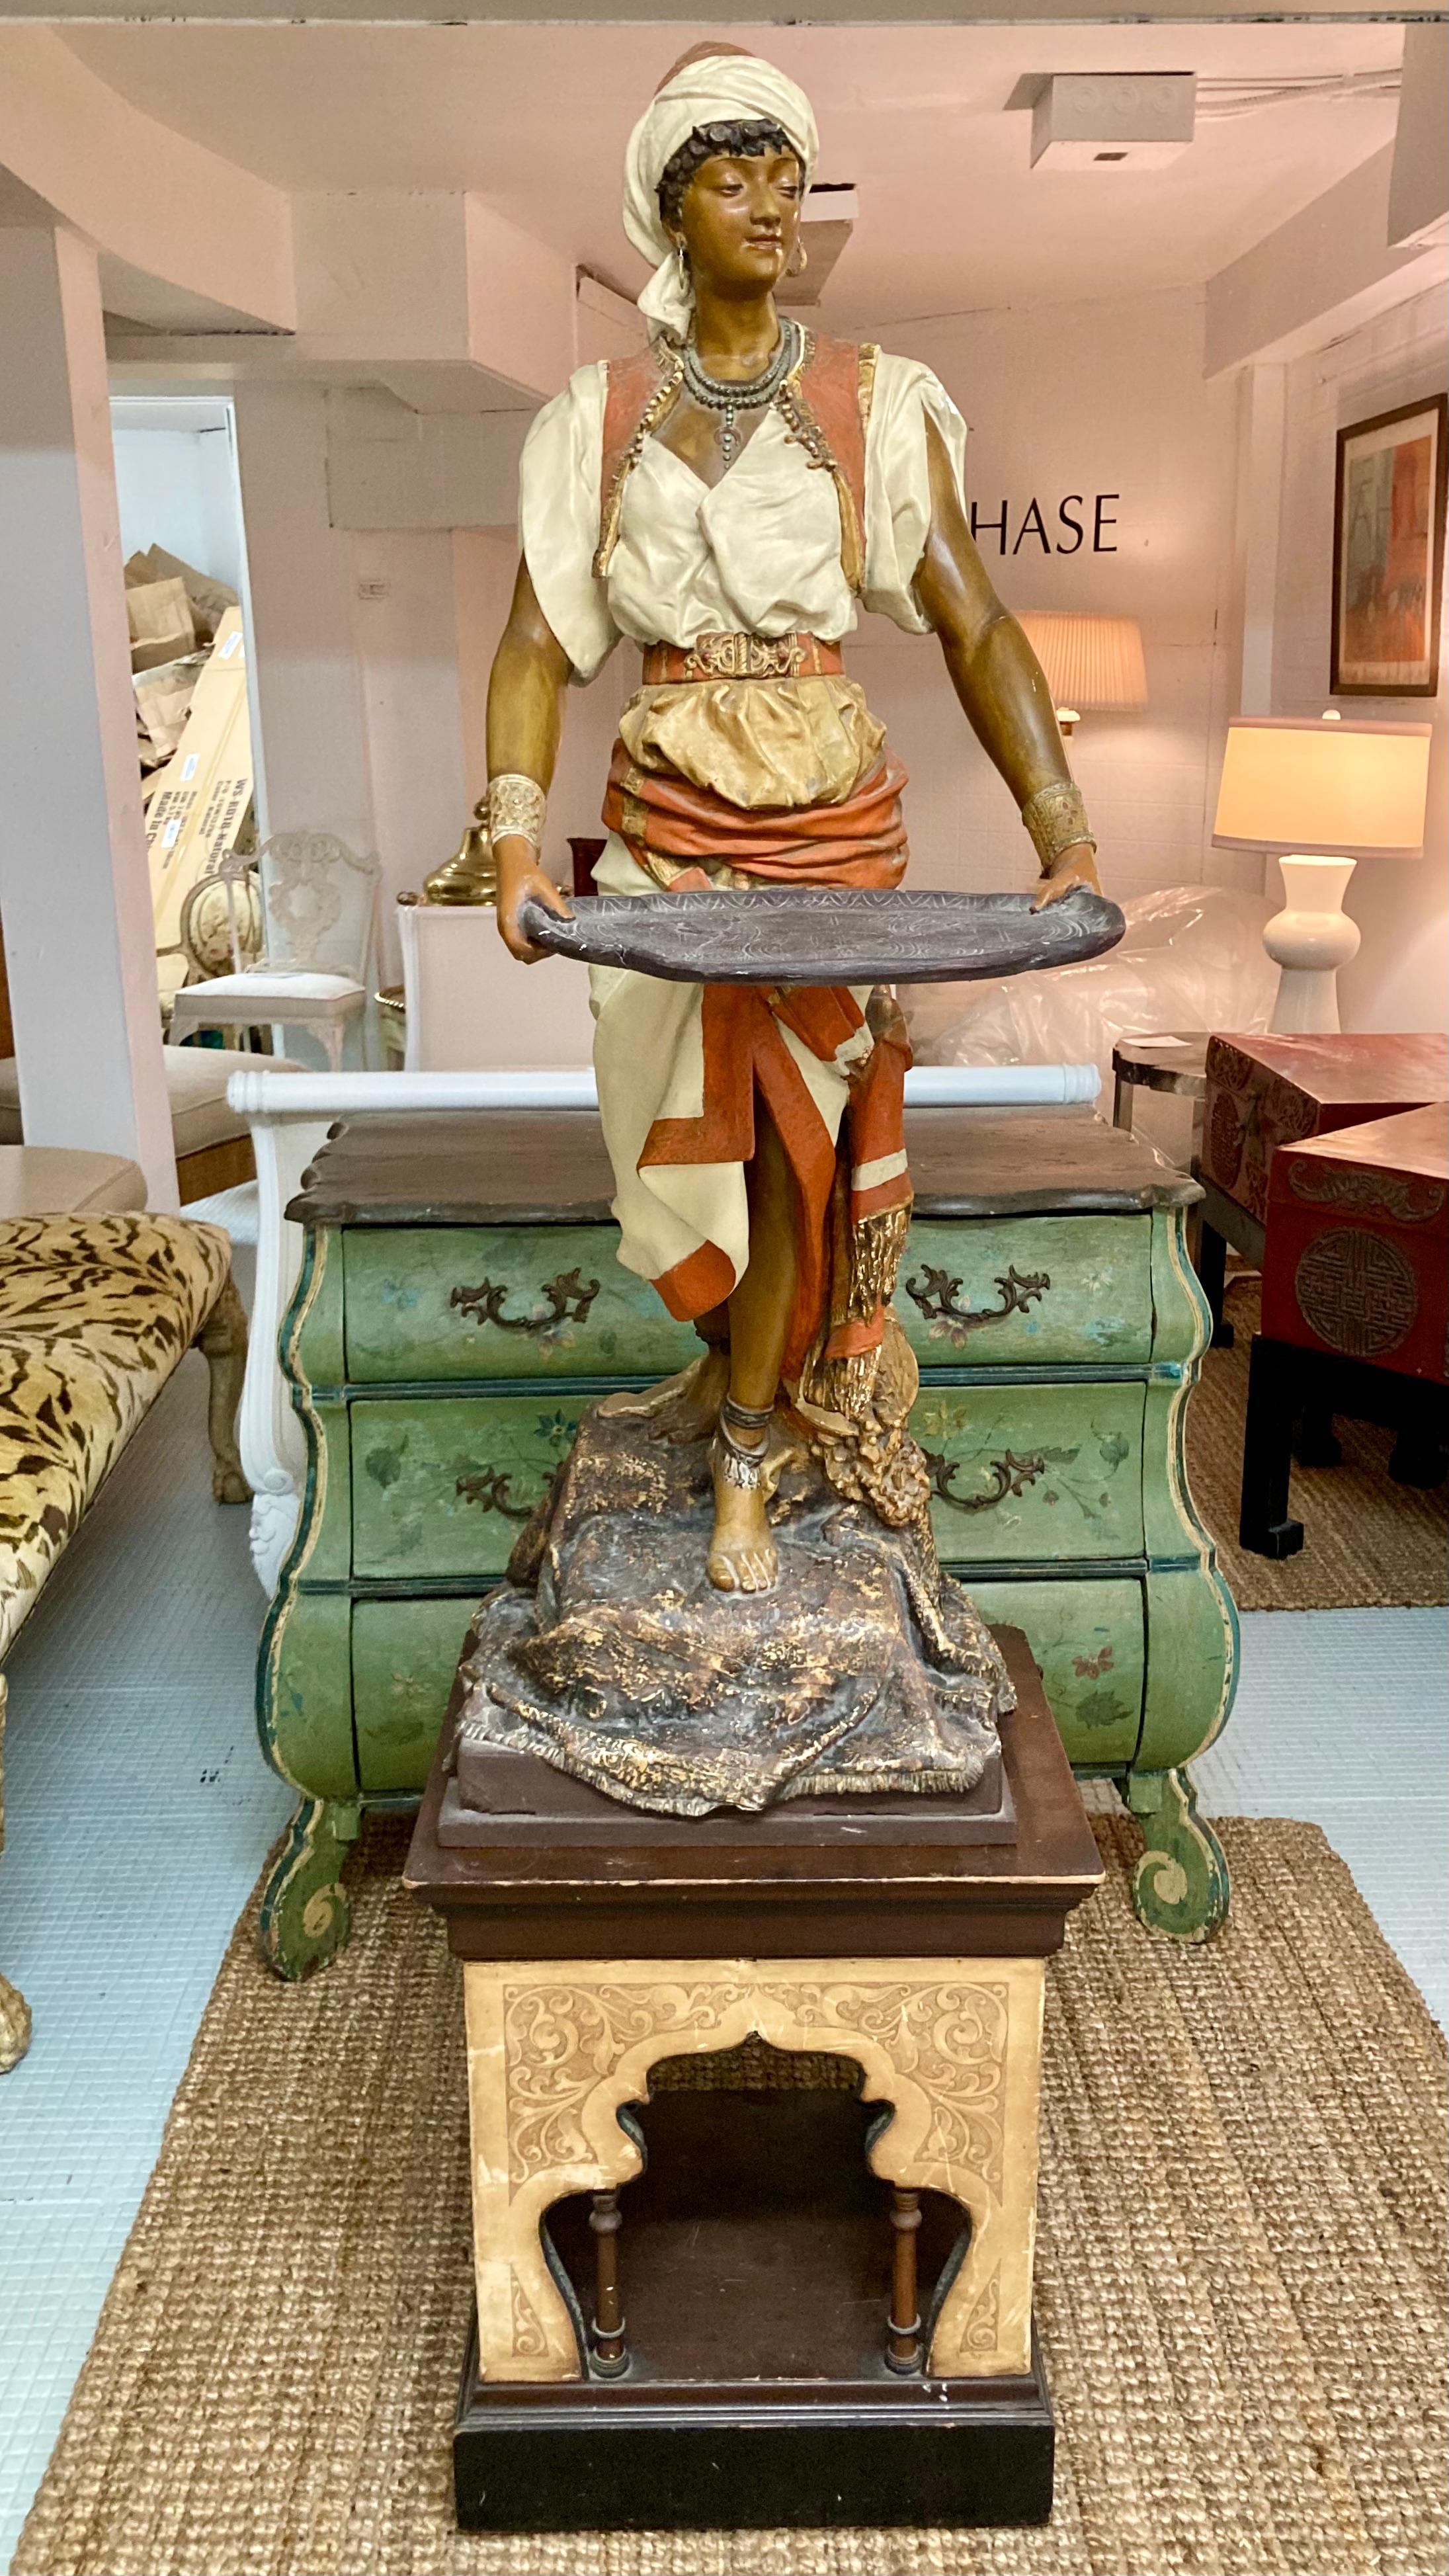 Beautiful large size 2-piece Louis Hottot statue of a lady in traditional clothing standing on a leather base. This is a hand painted plaster composition statue with incredible detailing. The size of this makes an extremely rare Louis Hottot style